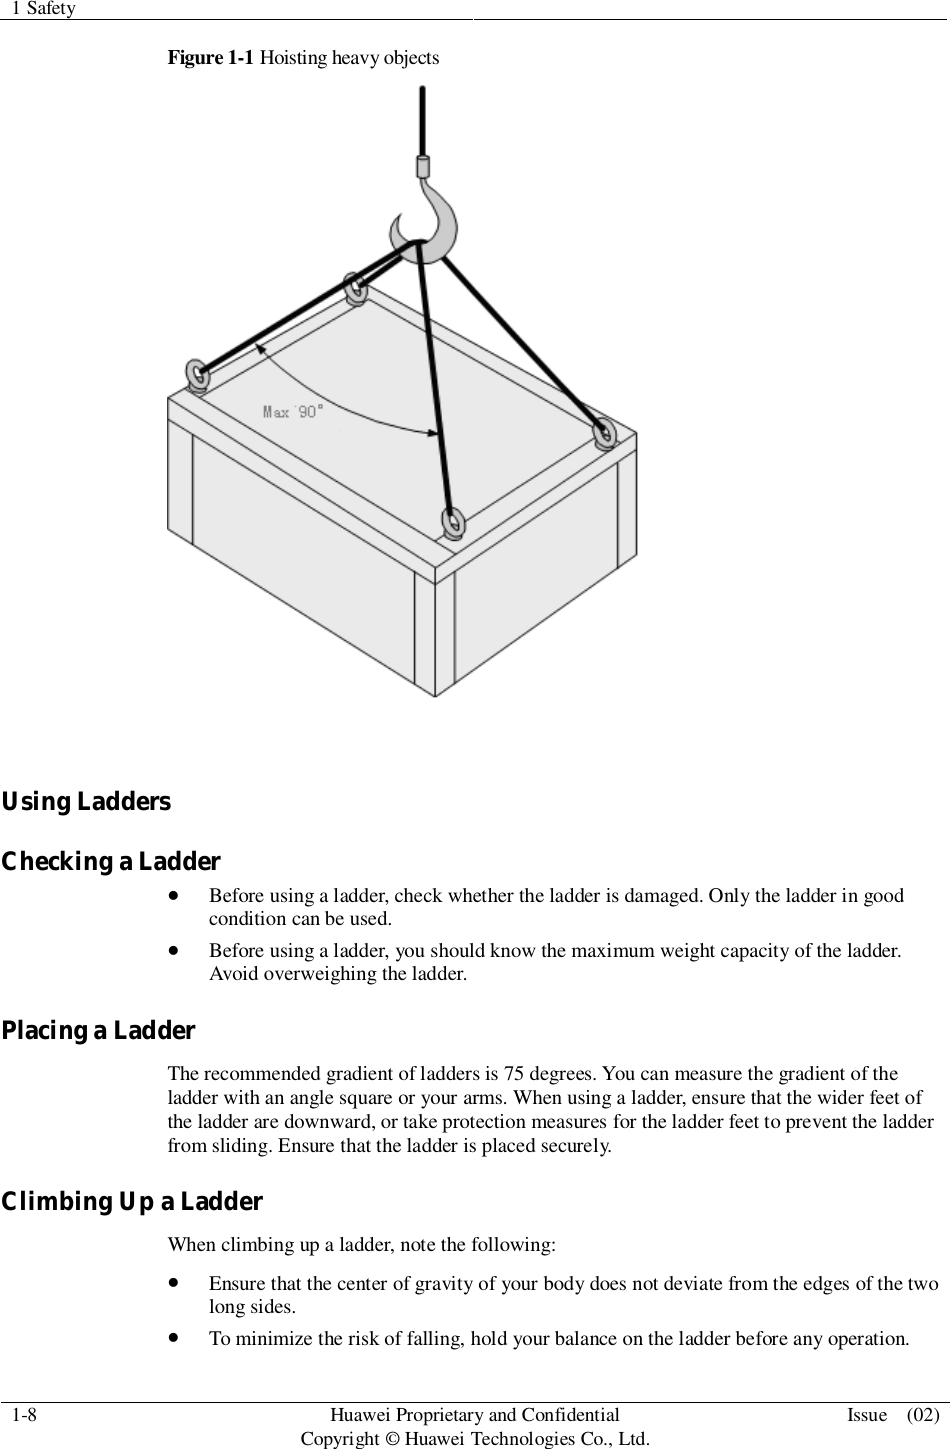 1 Safety1-8 HuaweiProprietary and ConfidentialCopyright © Huawei Technologies Co., Ltd. Issue  (02)Figure 1-1 Hoisting heavy objectsUsing LaddersChecking a LadderBefore using a ladder, check whether the ladder is damaged. Only the ladder in goodcondition can be used.Before using a ladder, you should know the maximum weight capacity of the ladder.Avoid overweighing the ladder.Placing a LadderThe recommended gradient of ladders is 75 degrees. You can measure the gradient of theladder with an angle square or your arms. When using a ladder, ensure that the wider feet ofthe ladder are downward, or take protection measures for the ladder feet to prevent the ladderfrom sliding. Ensure that the ladder is placed securely.Climbing Up a LadderWhen climbing up a ladder, note the following:Ensure that the center of gravity of your body does not deviate from the edges of the twolong sides.To minimize the risk of falling, hold your balance on the ladder before any operation.